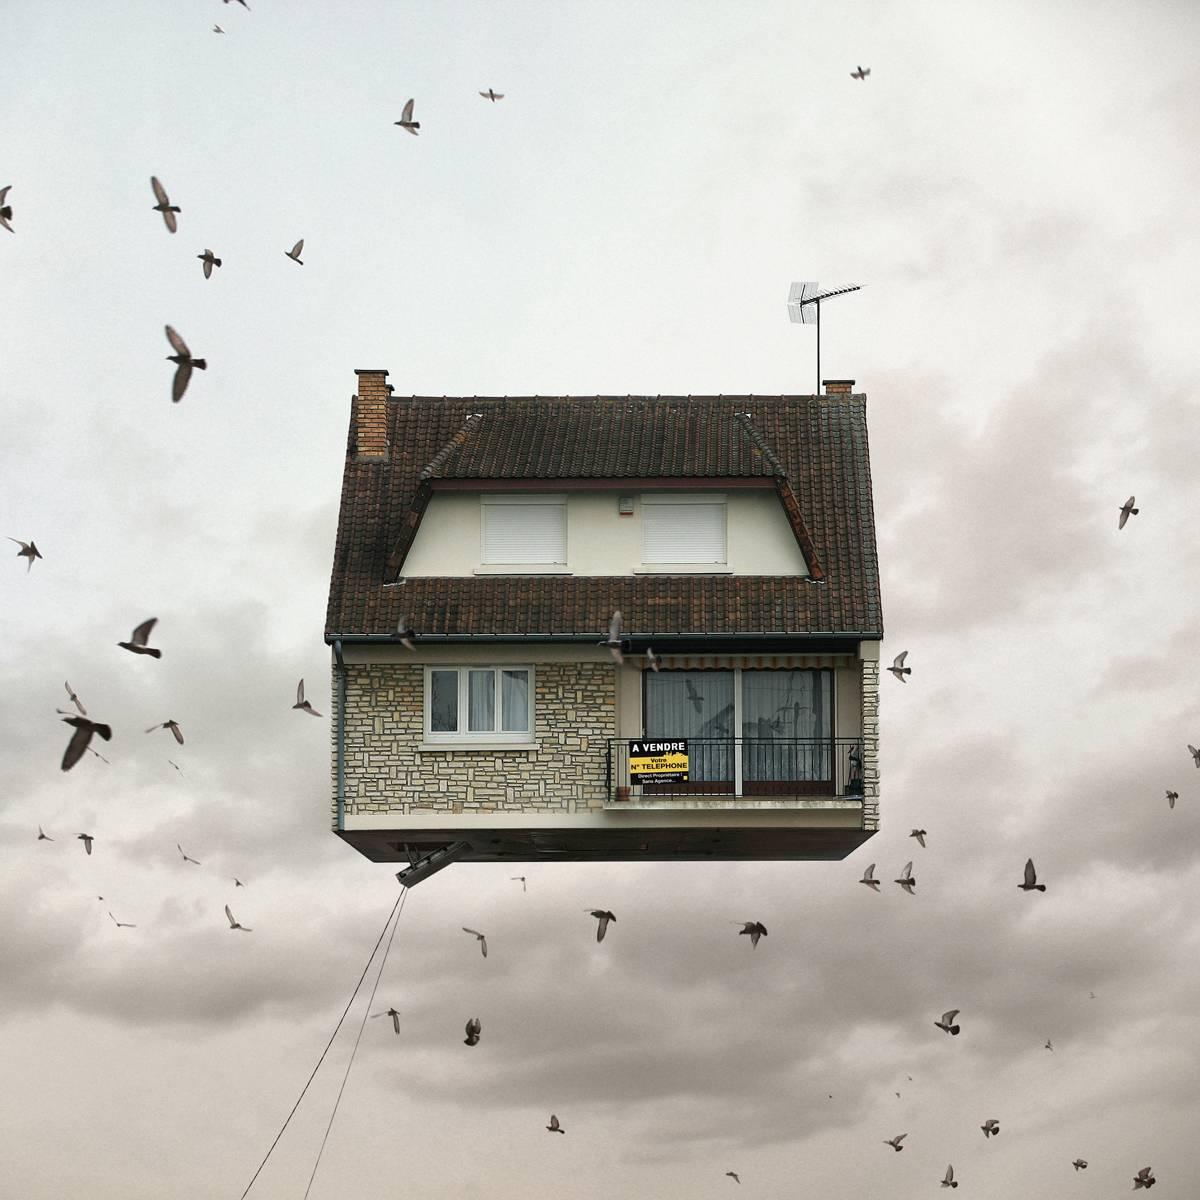 For Sale - Comptemporary whimsical digital color photograph of flying house